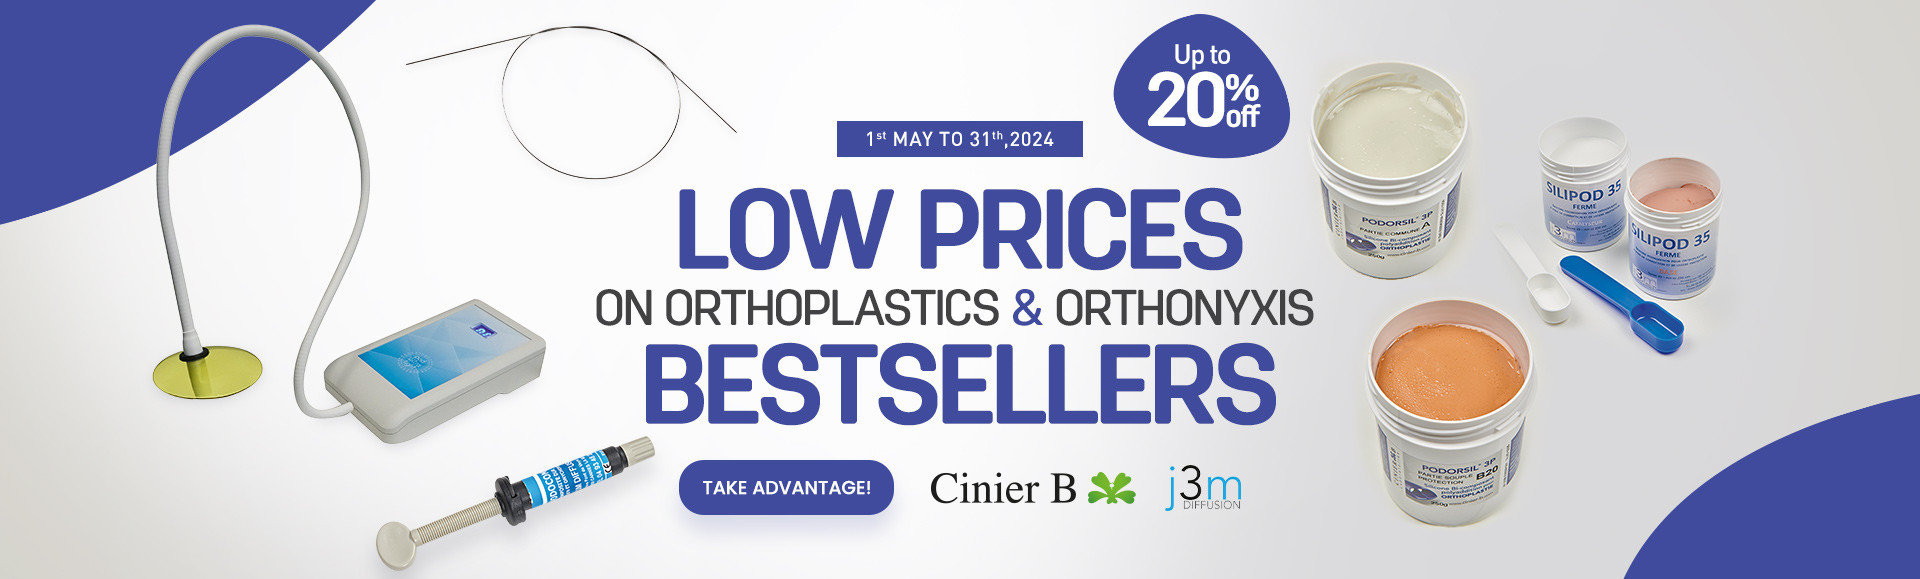 Low prices on orthoplastics and orthonyxis bestsellers until 31/05